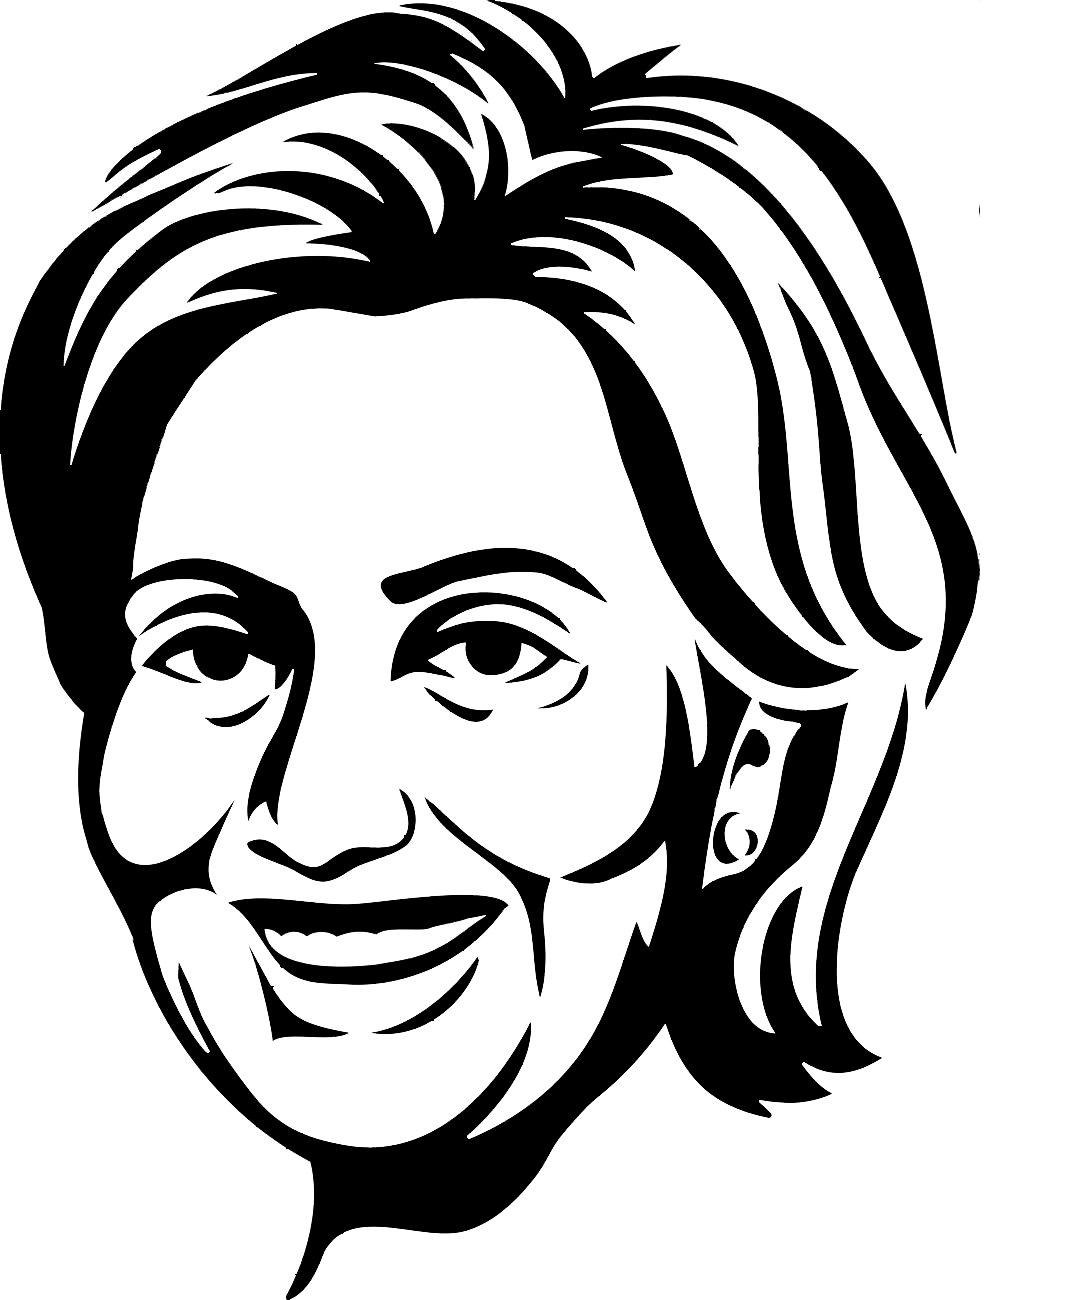 Hair United Clinton Tshirt Face States Hillary PNG Image